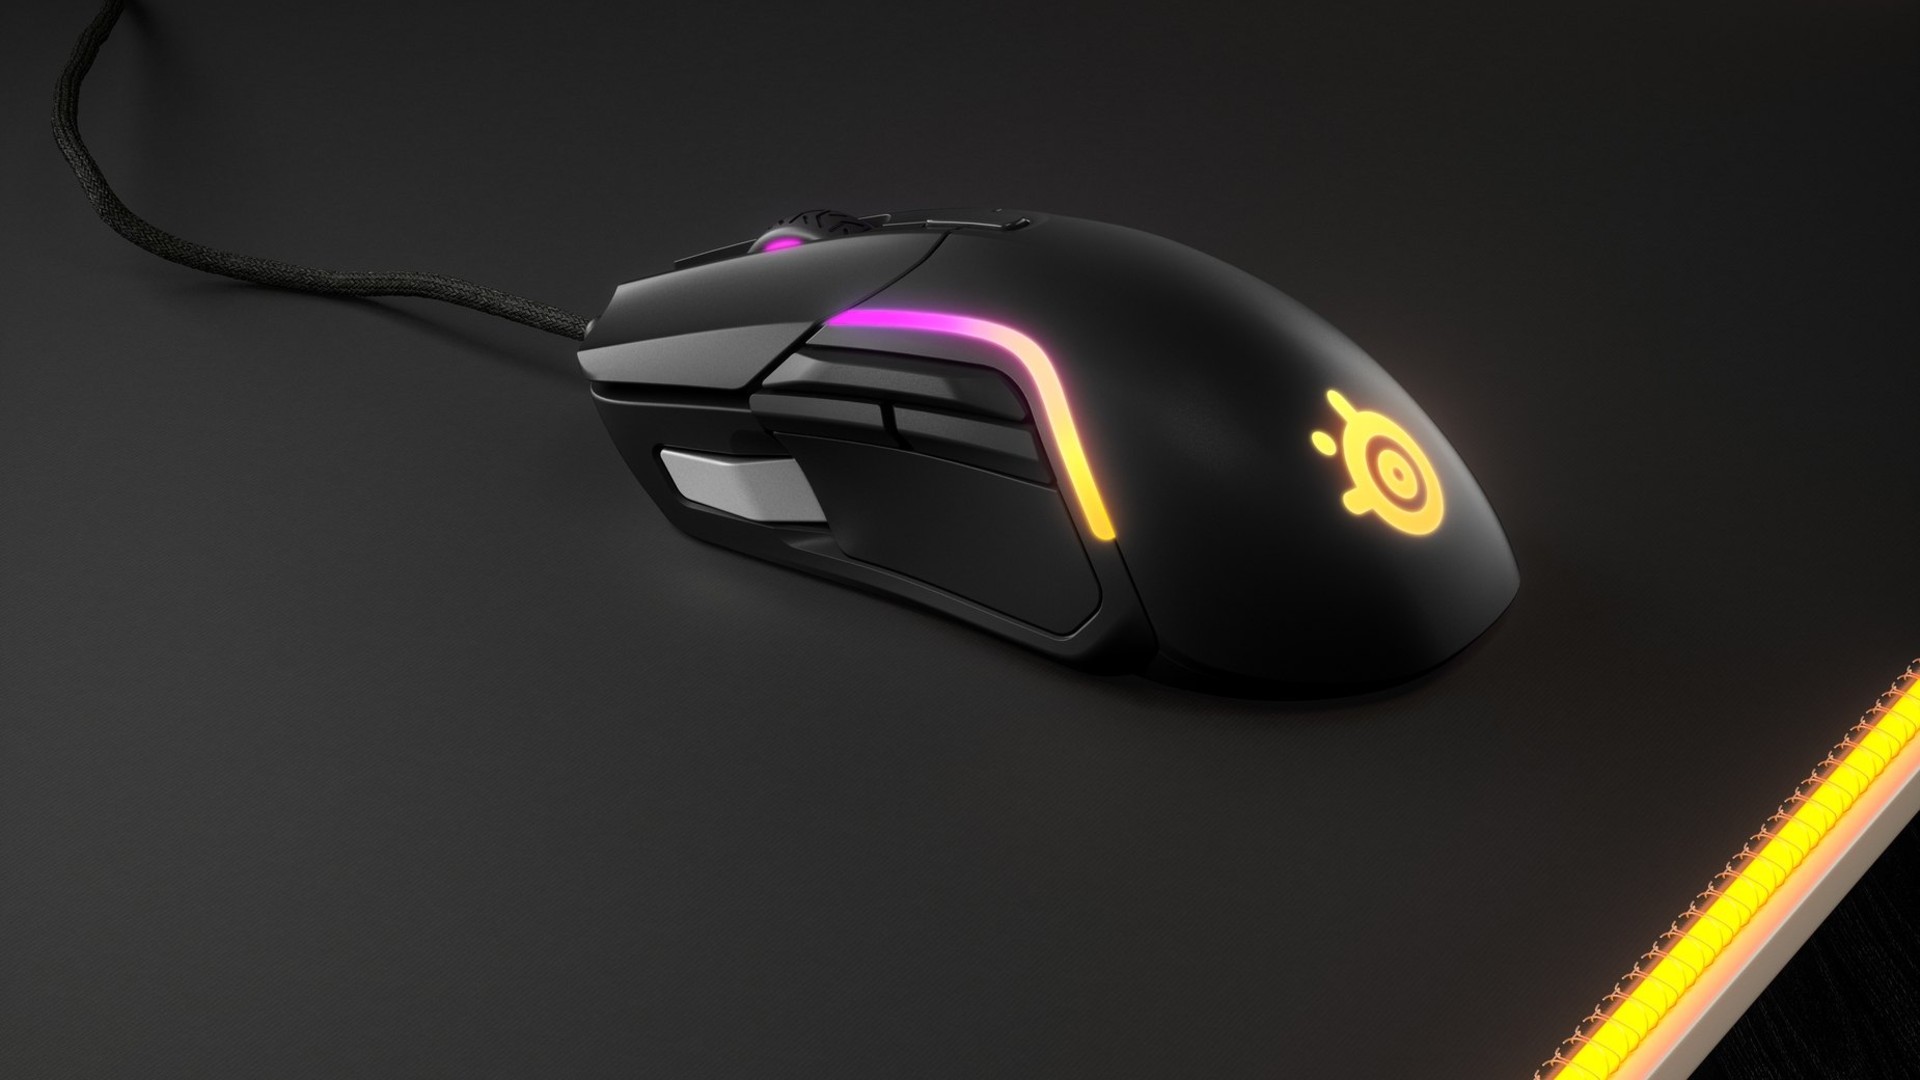 Best gaming mouse 2021 – The top clickers for your setup